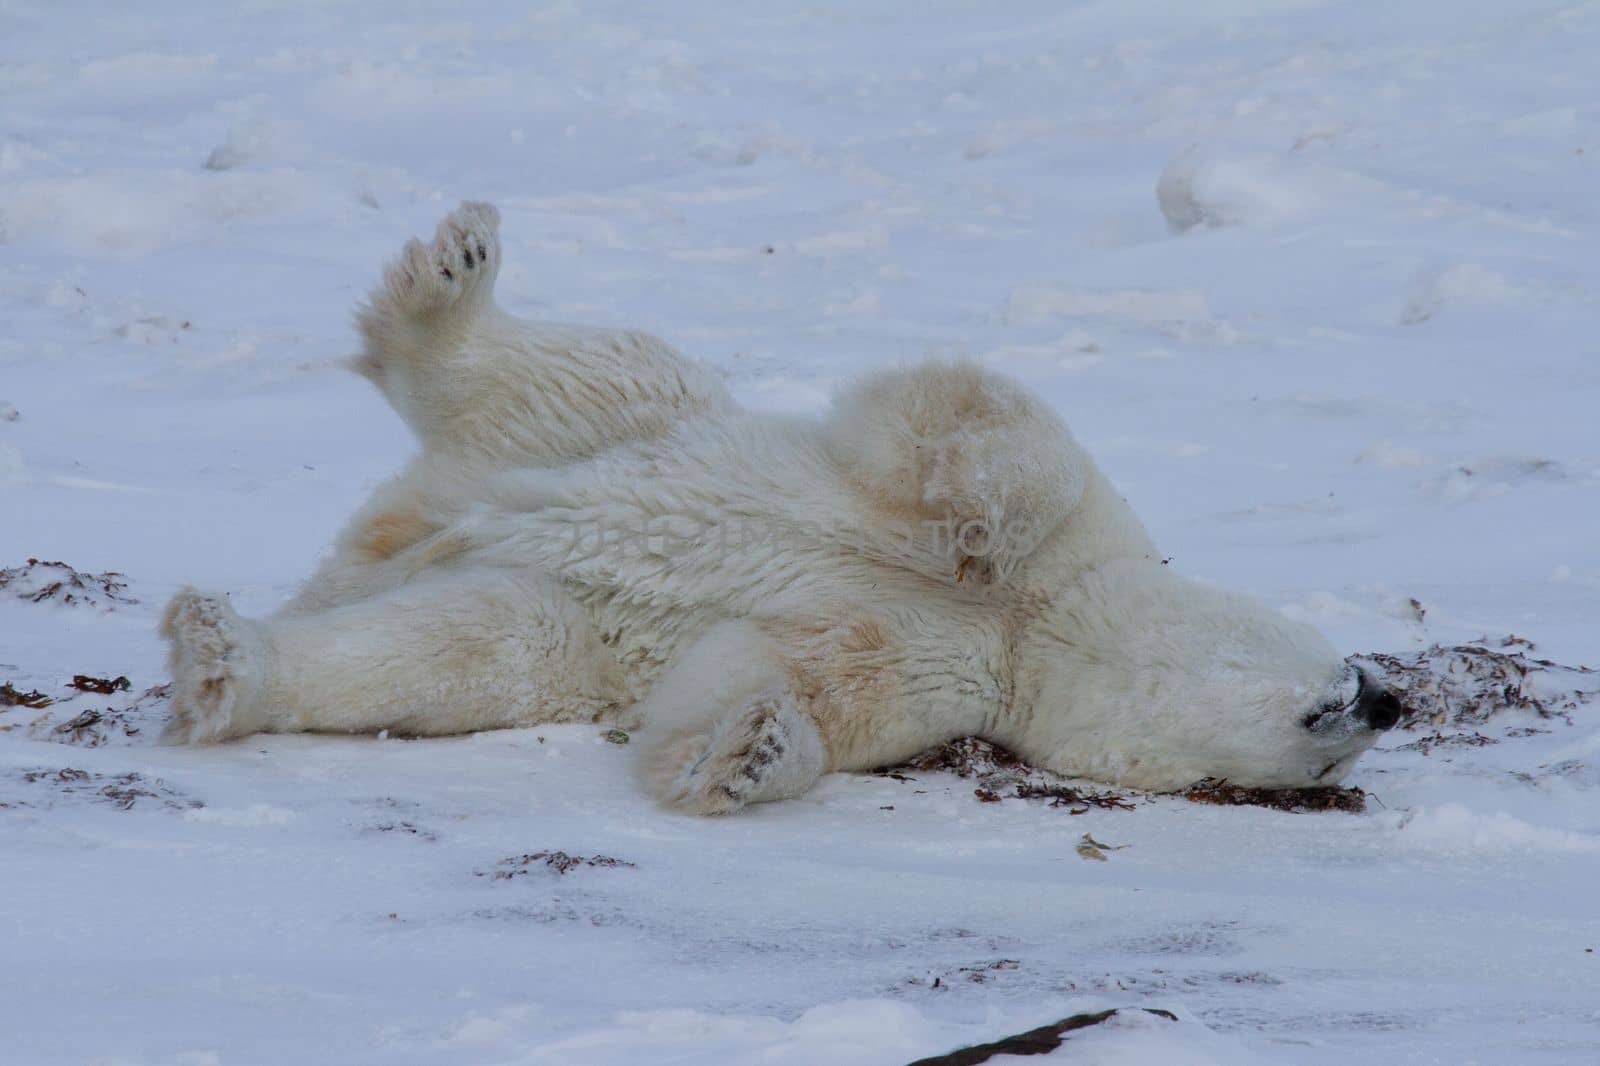 A polar bear rolling around in snow with legs in the air, with snow on the ground by Granchinho